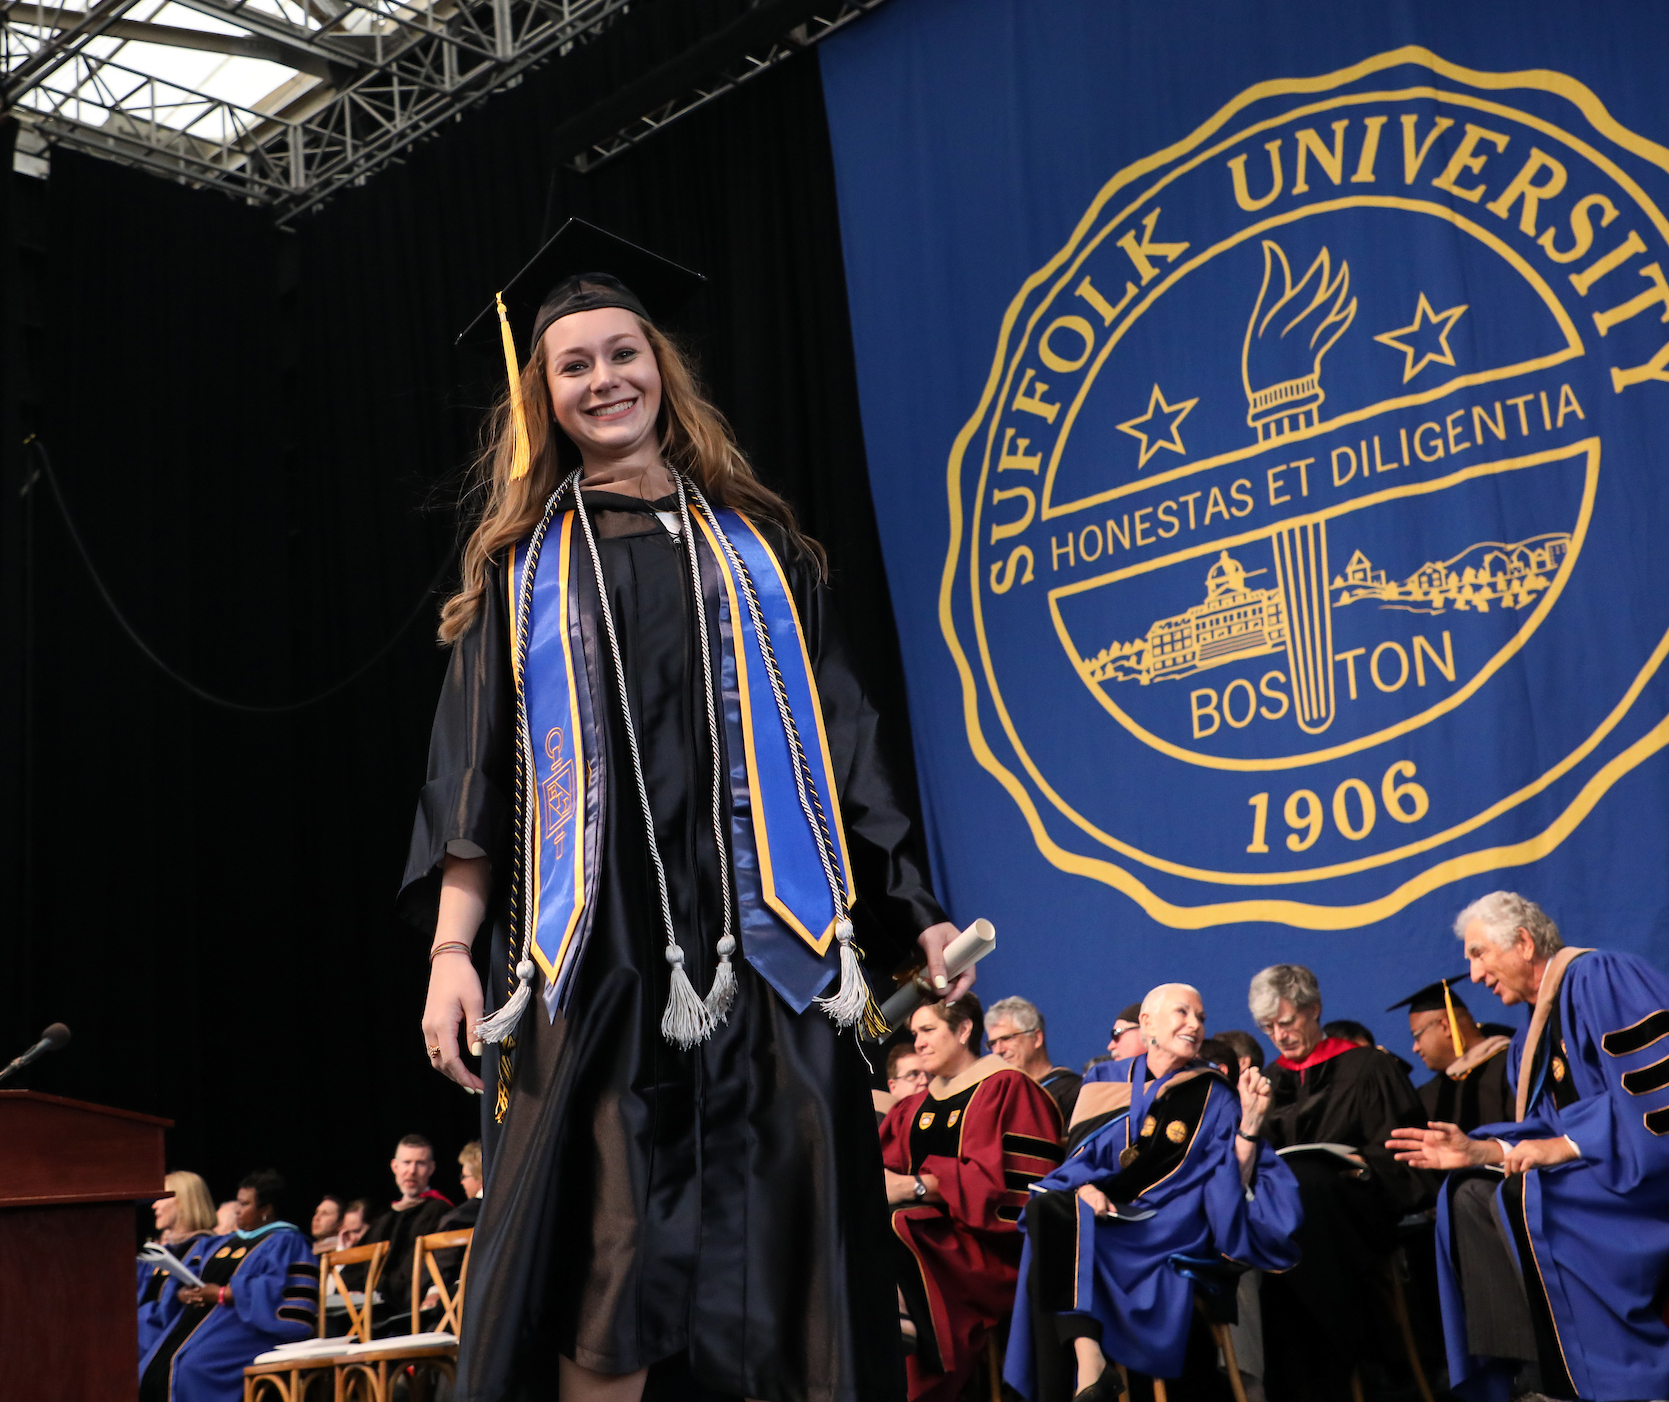 Morgan pauses while walking across the stage at Commencement to smile for the camera.